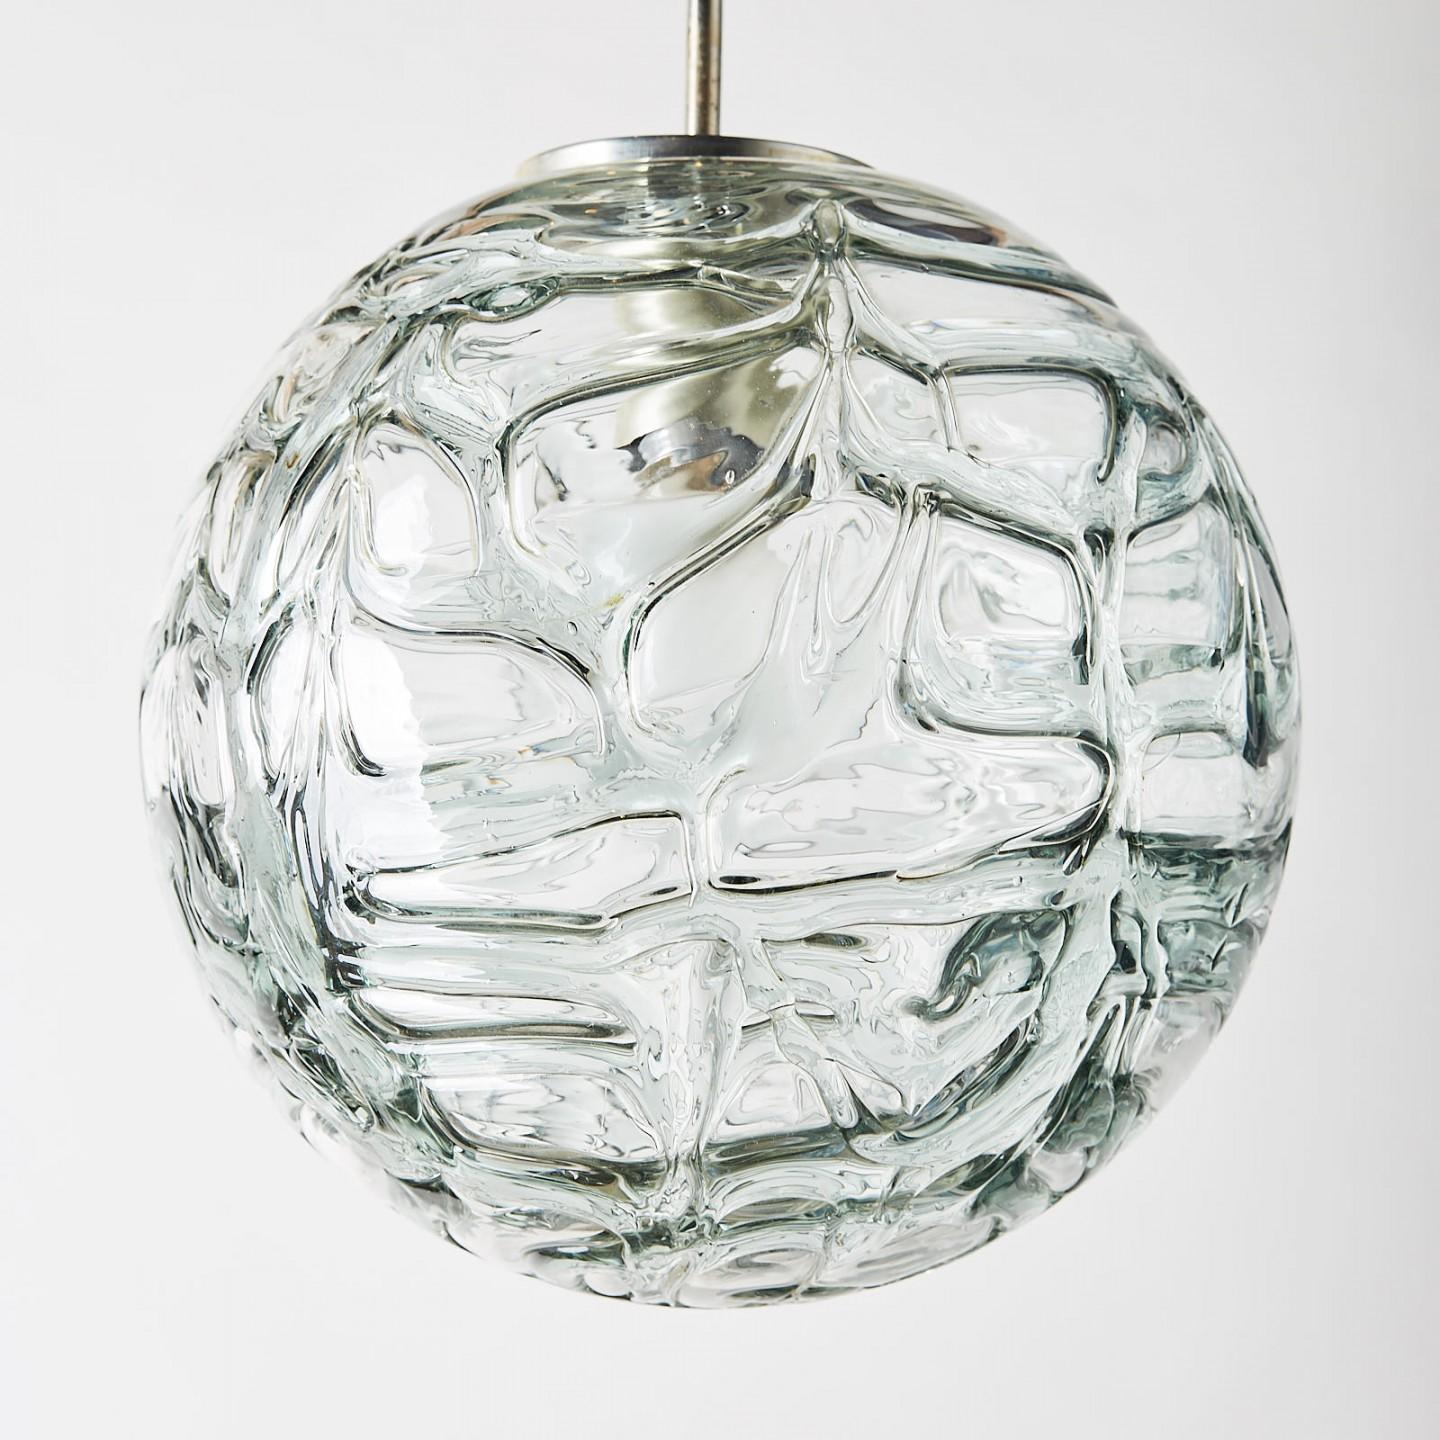 A 1970s hand blown textured glass pendant by Doria, Germany.